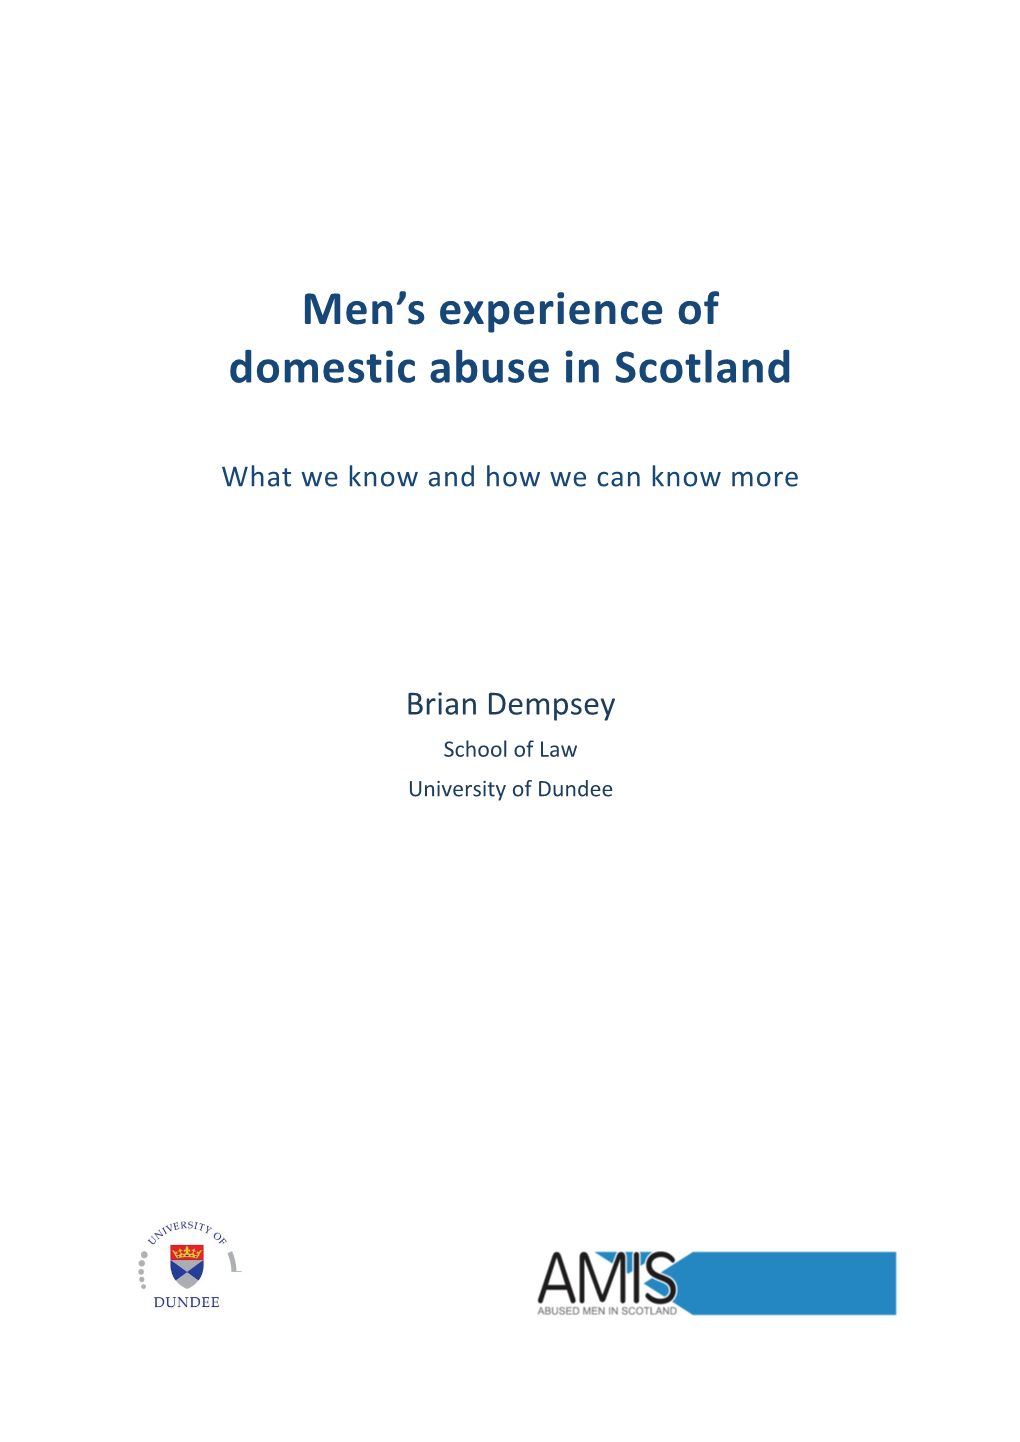 Men's Experience of Domestic Abuse in Scotland